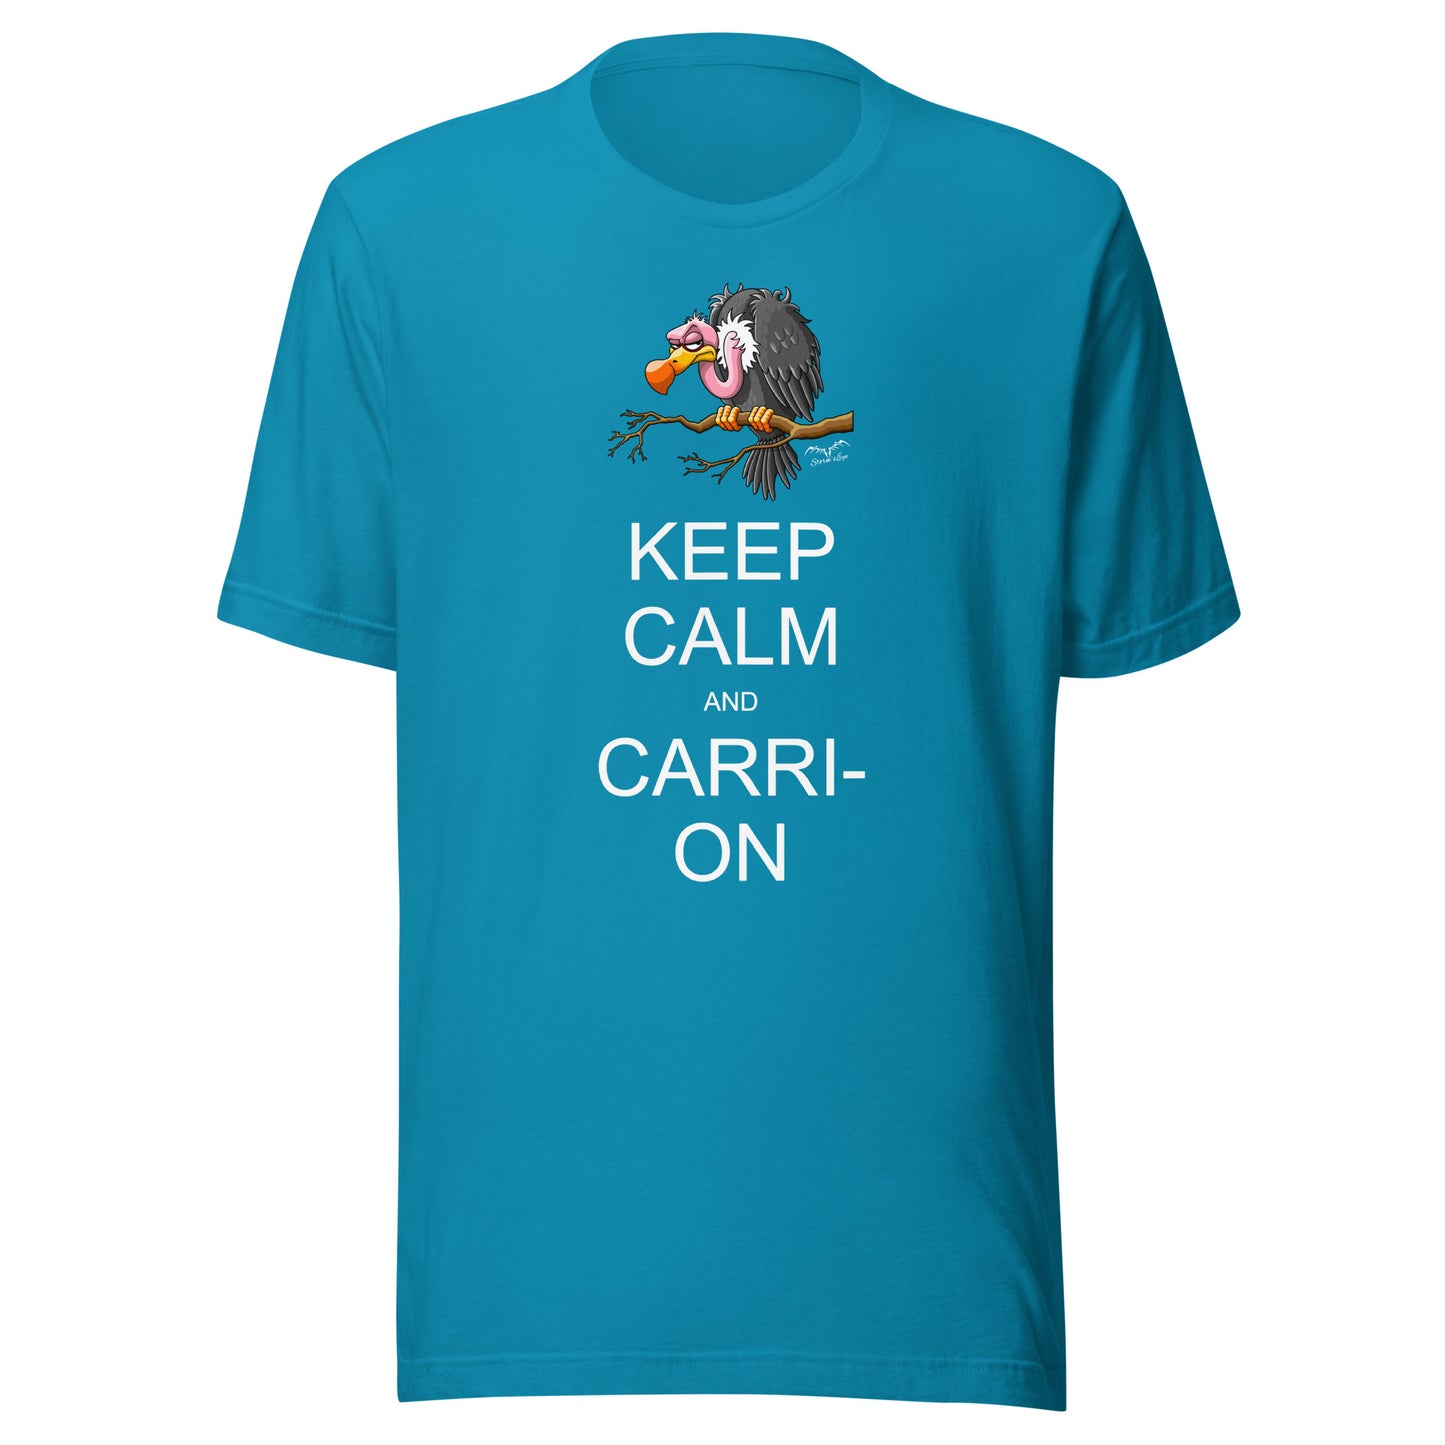 keep calm and carrion vulture t-shirt bright blue by stormseye design